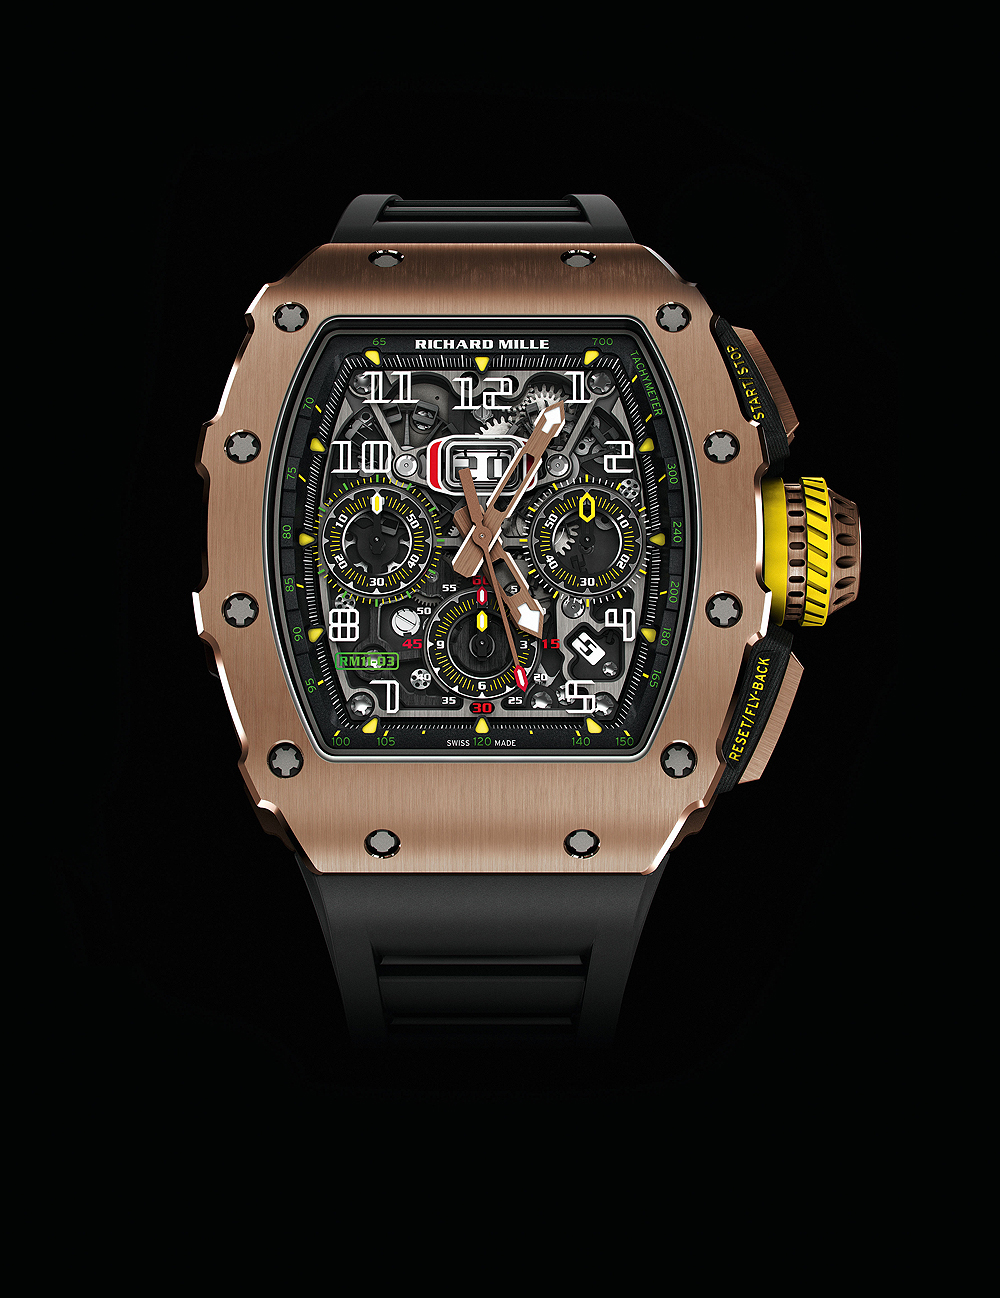 Richard Mille Automatic Flyback Chronograph Dual Time Zone